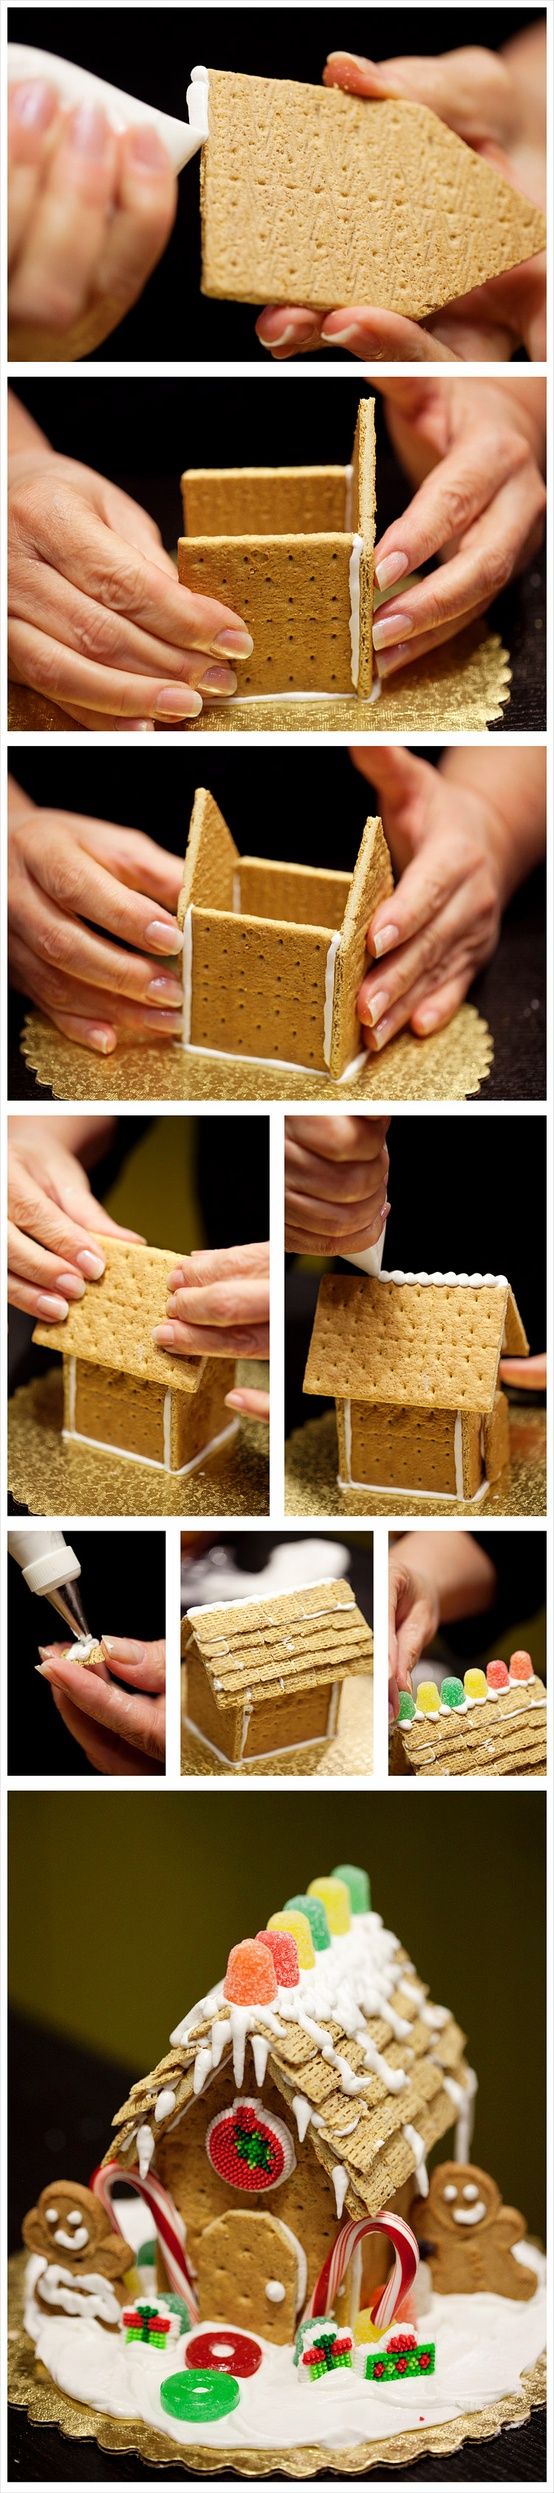 DIY: Gingerbread House made out of graham crackers